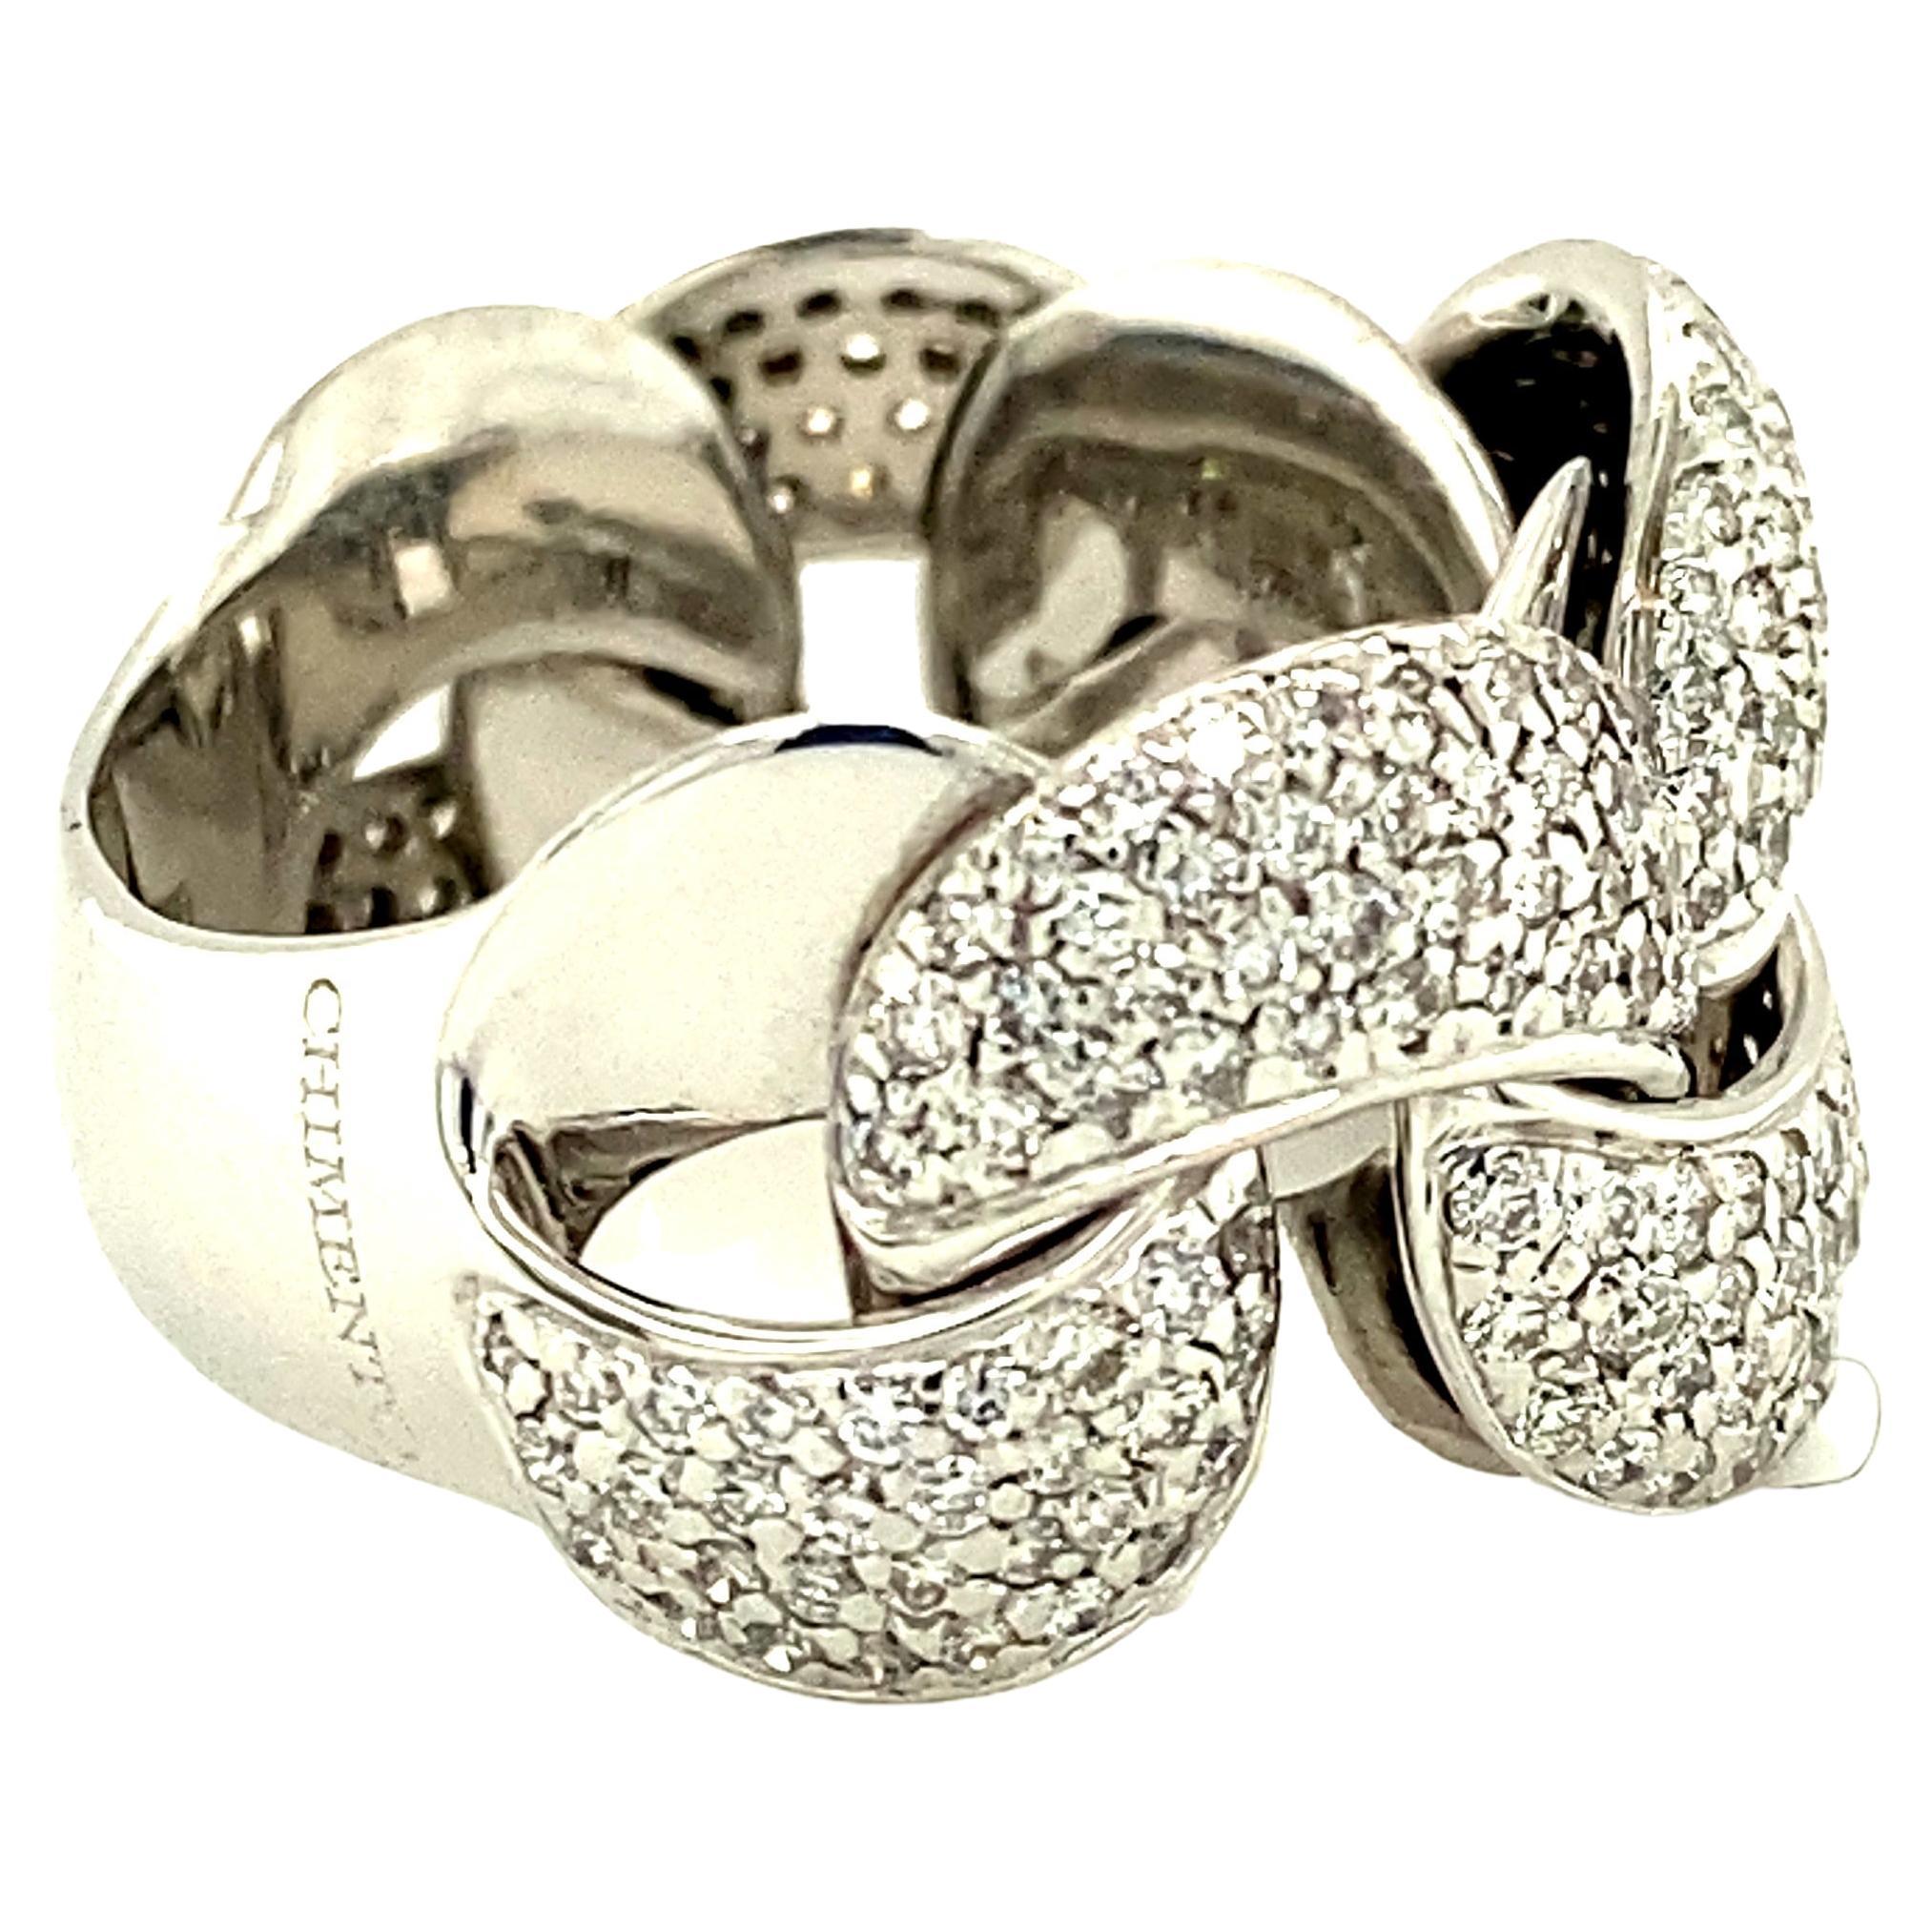 One 18 karat white gold (stamped 780) diamond chain link ring by Chimento, set with approximately 1.67 carat total weight of round brilliant cut diamonds with matching G/H color and SI1 clarity.  The ring is a finger size 9 and can be resized.  